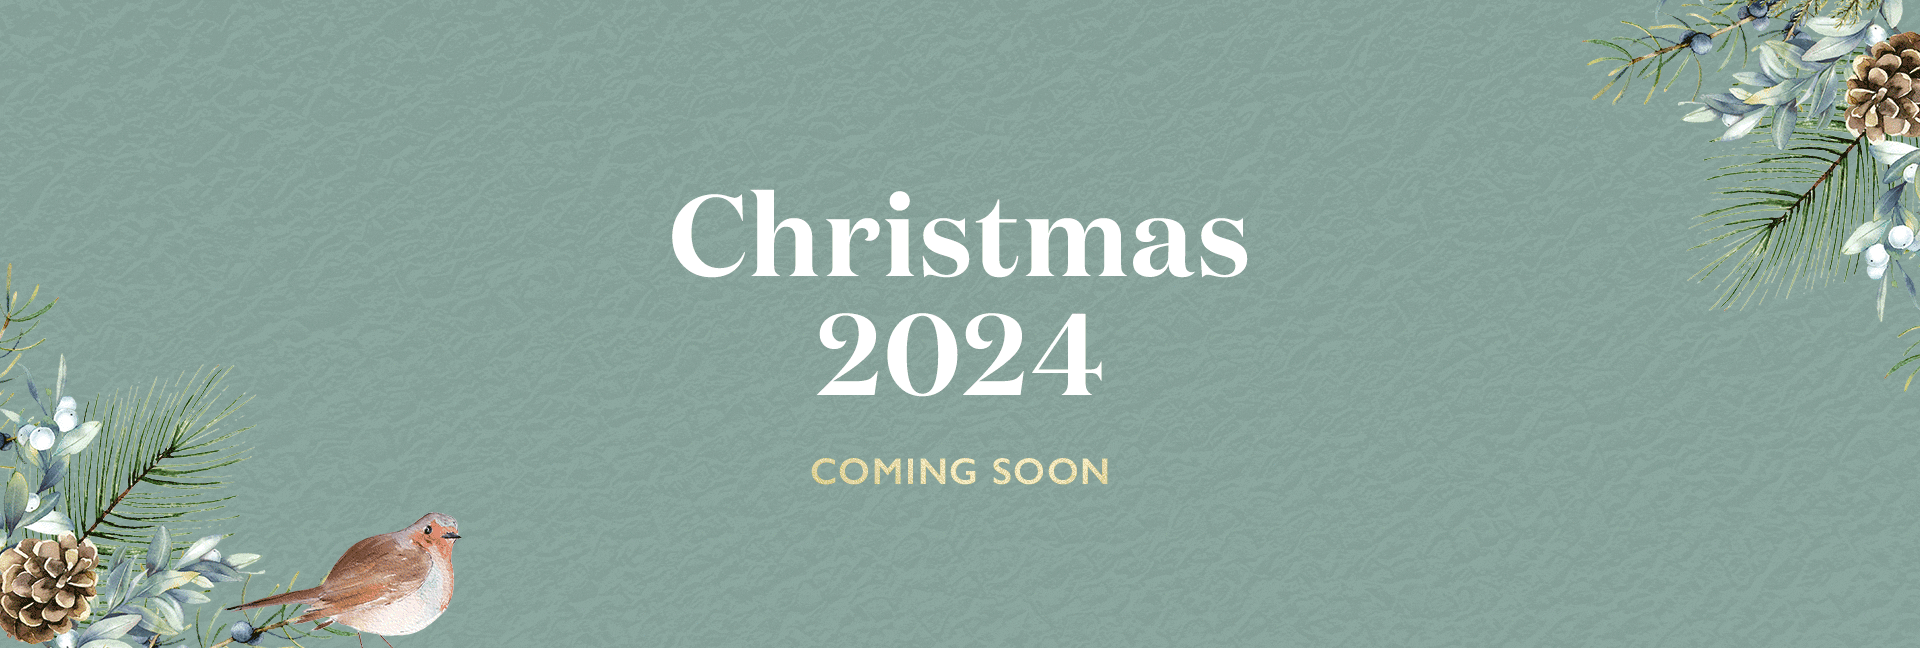 Join Us for Christmas 2024 in Cheadle The March Hare